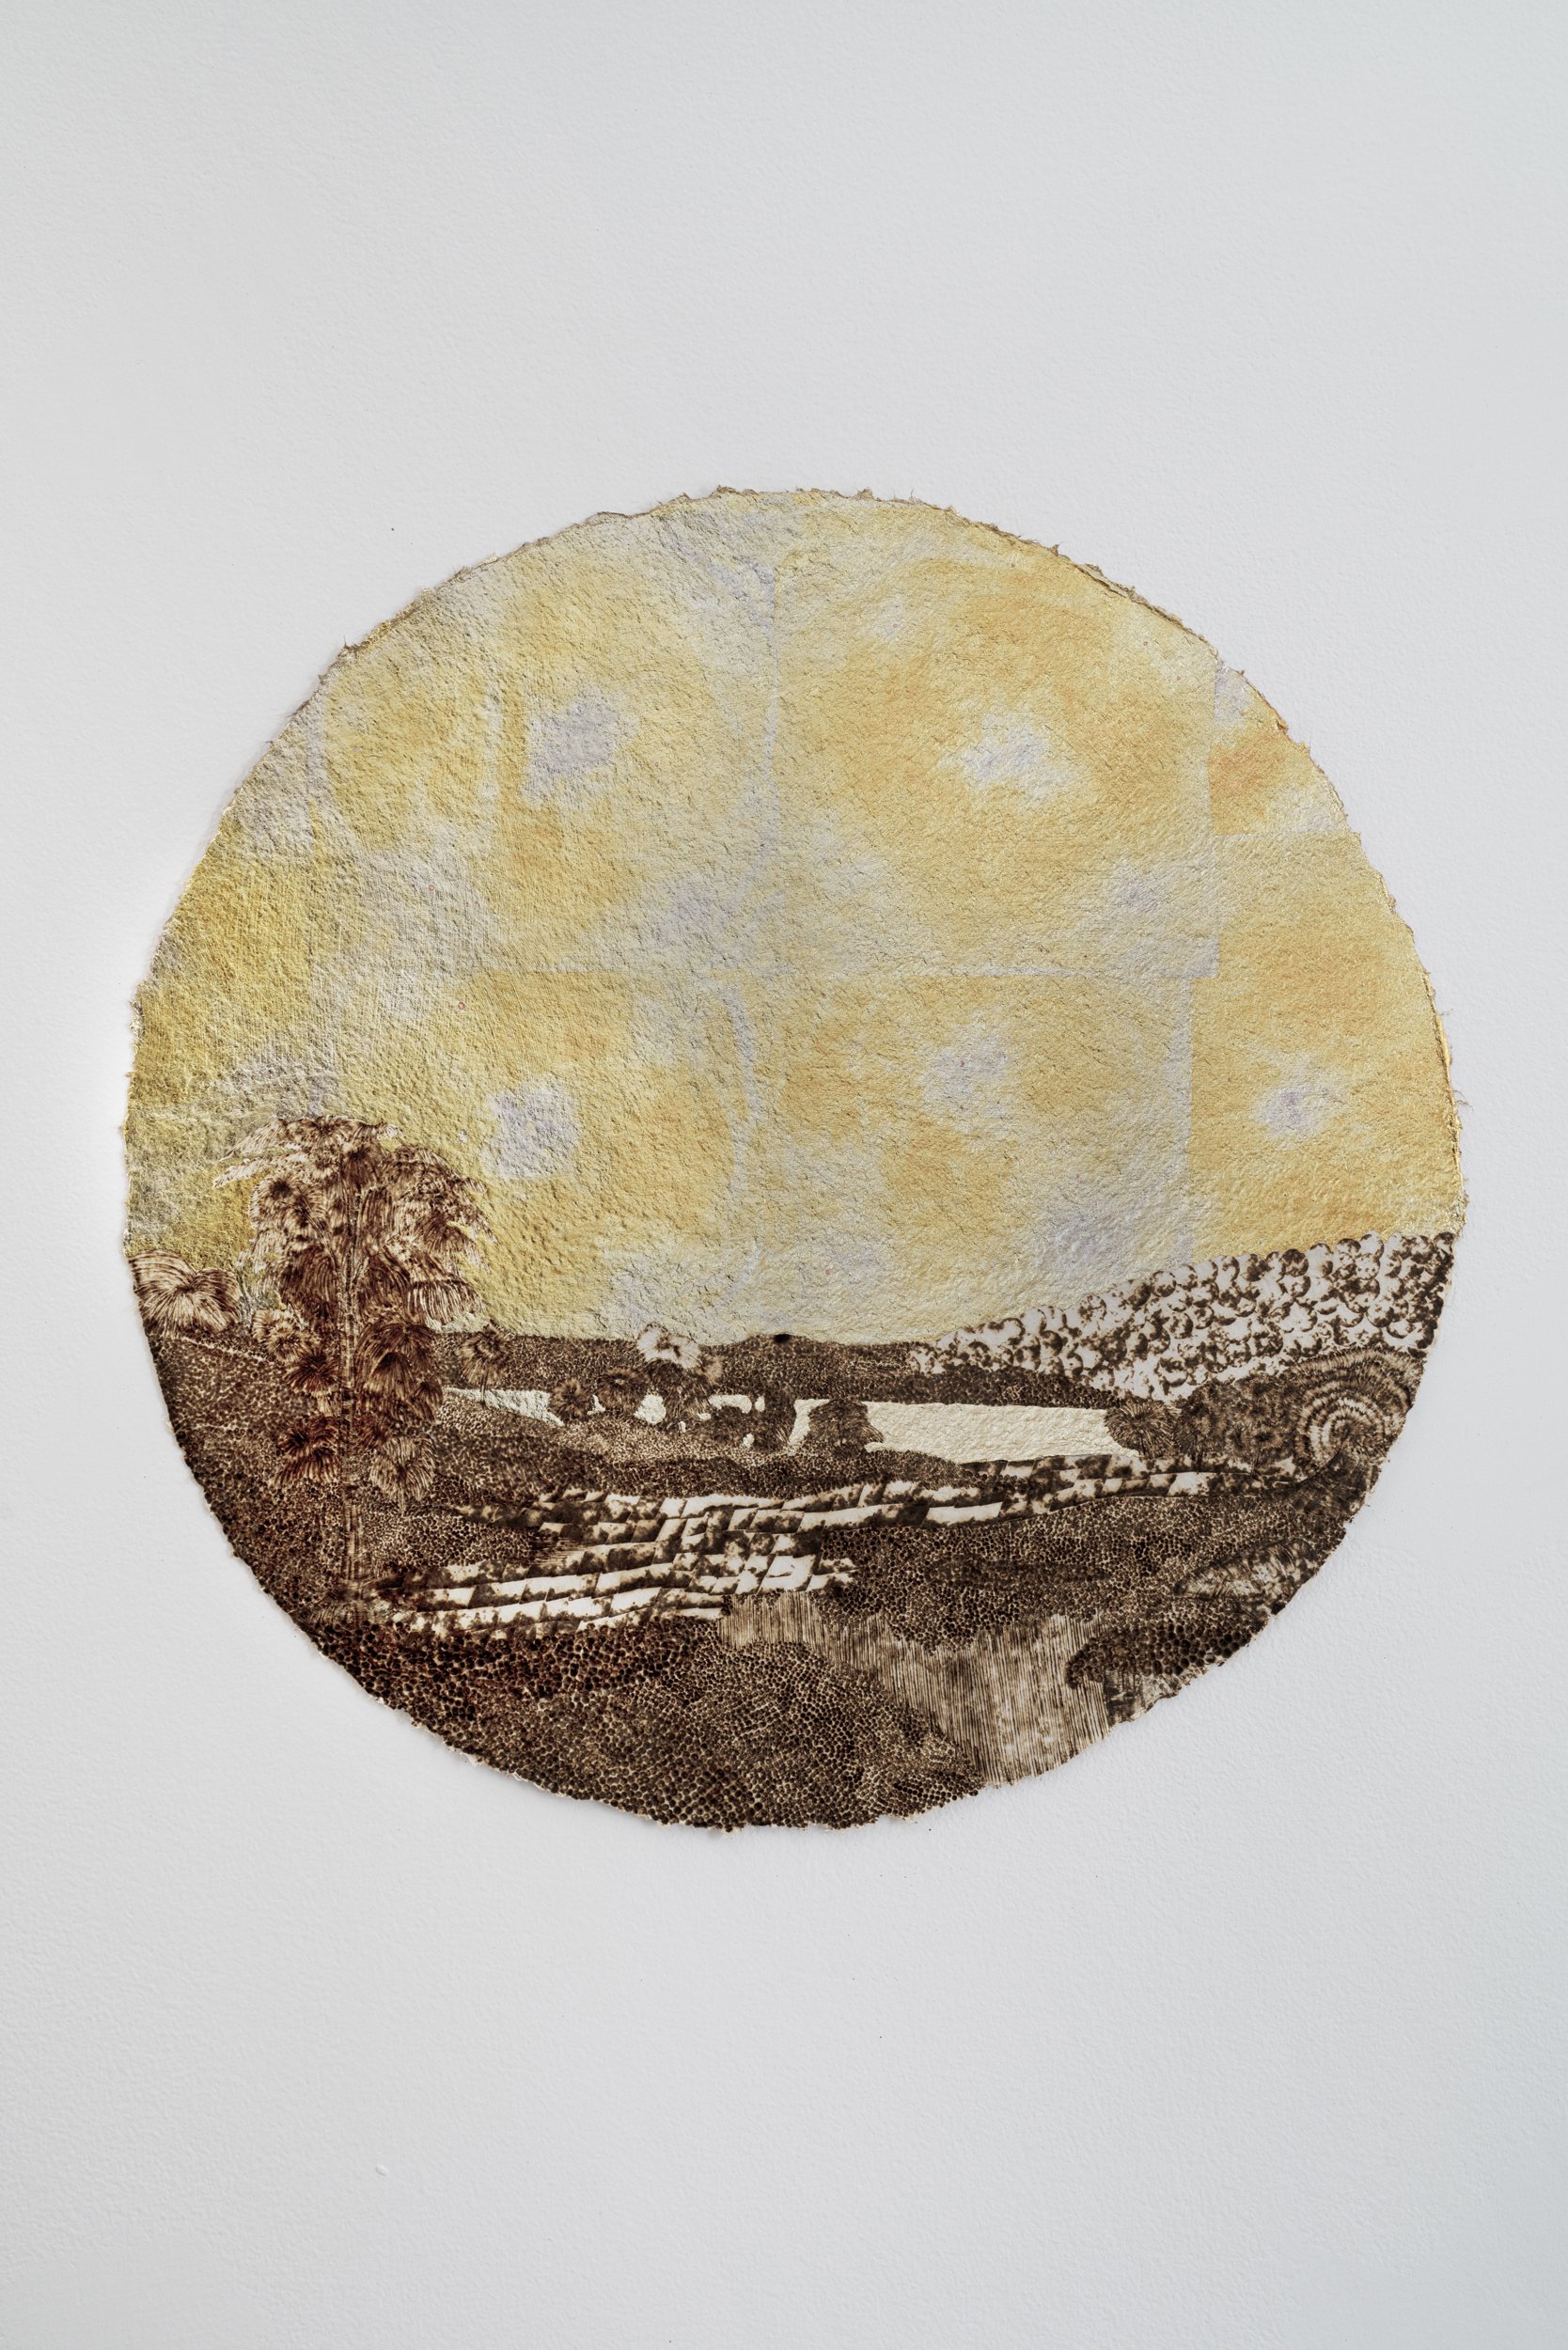   Landscape with Rainbow at Sunrise as things Emerge (for R. S. D.),  1859/2021, burned handmade paper with blue pencil, variegated metal and composition gold leaf, 16 inches in diameter 